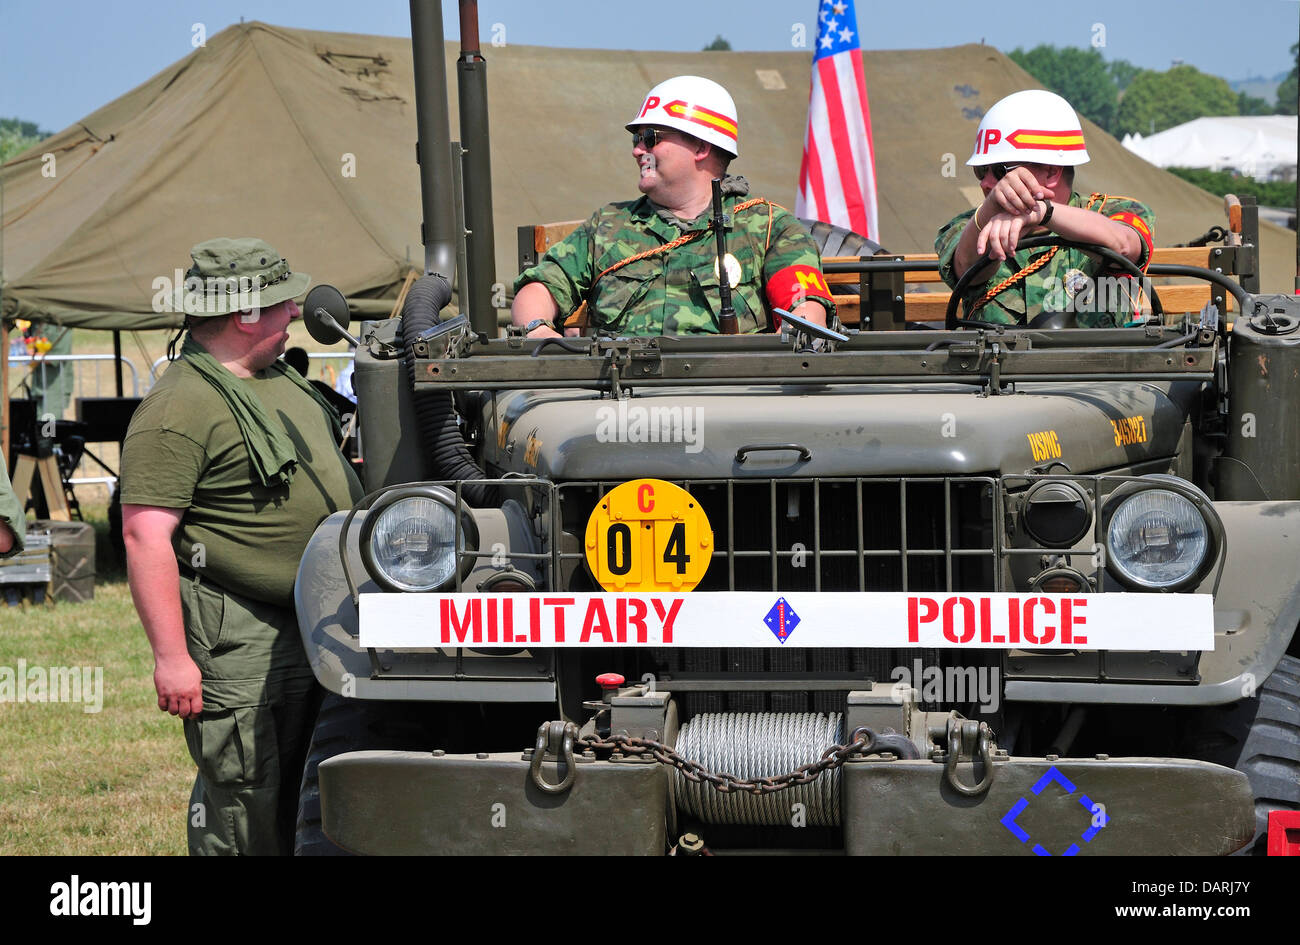 American Military Police in jeep. War and Peace Revival, July 2013. Folkestone Racecourse, Kent, England, UK. Stock Photo